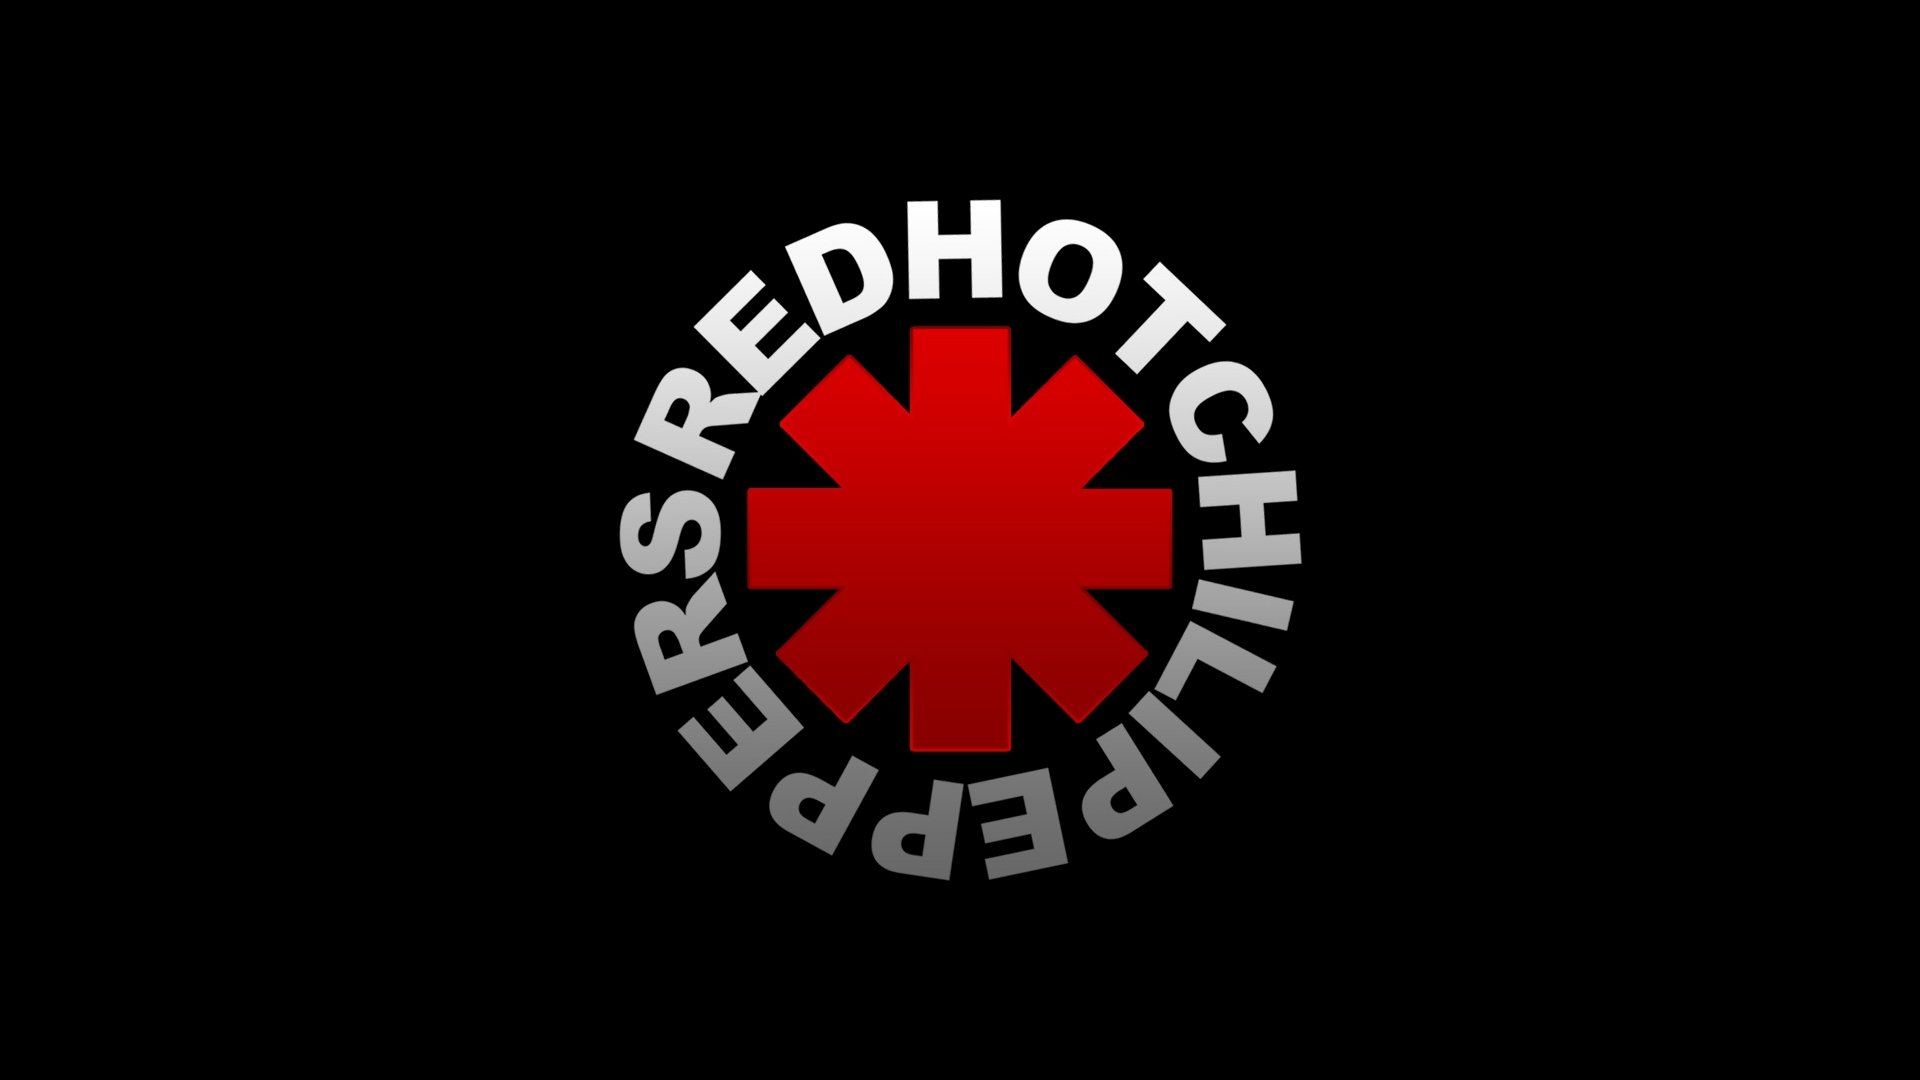 Red hot chili peppers tissue. Red hot Chili Peppers логотип группы. Red hot Chili Peppers знак. Ред хот Чили пеперс эмблема. RHCP знак.